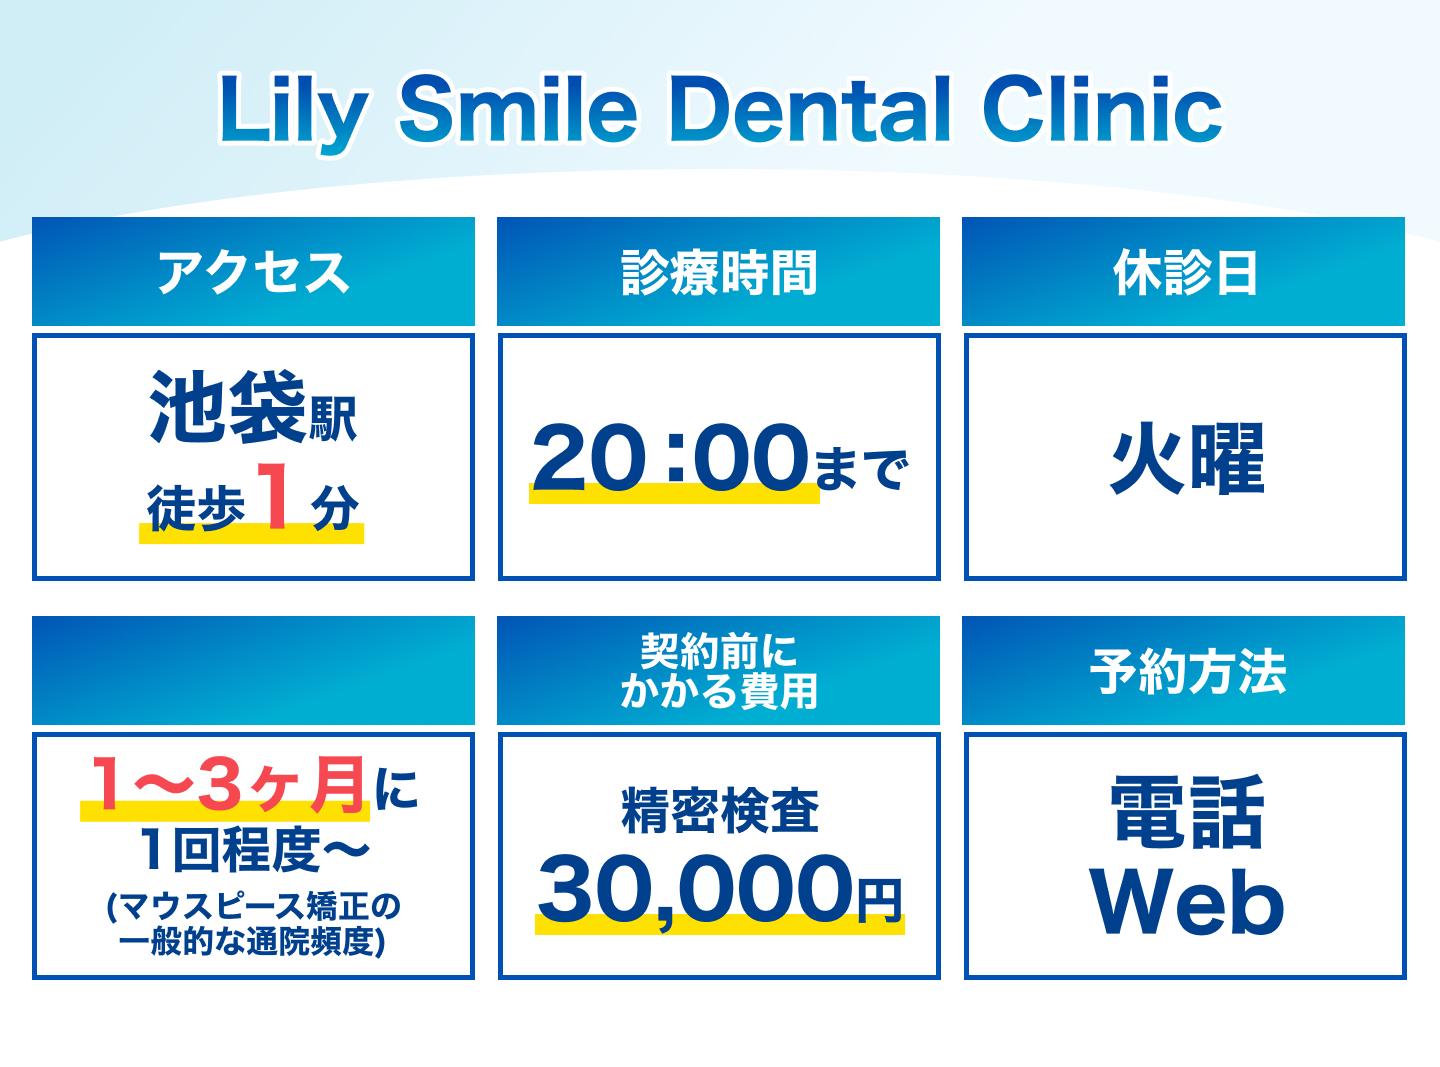 Lily Smile Dental Clinicの基本情報